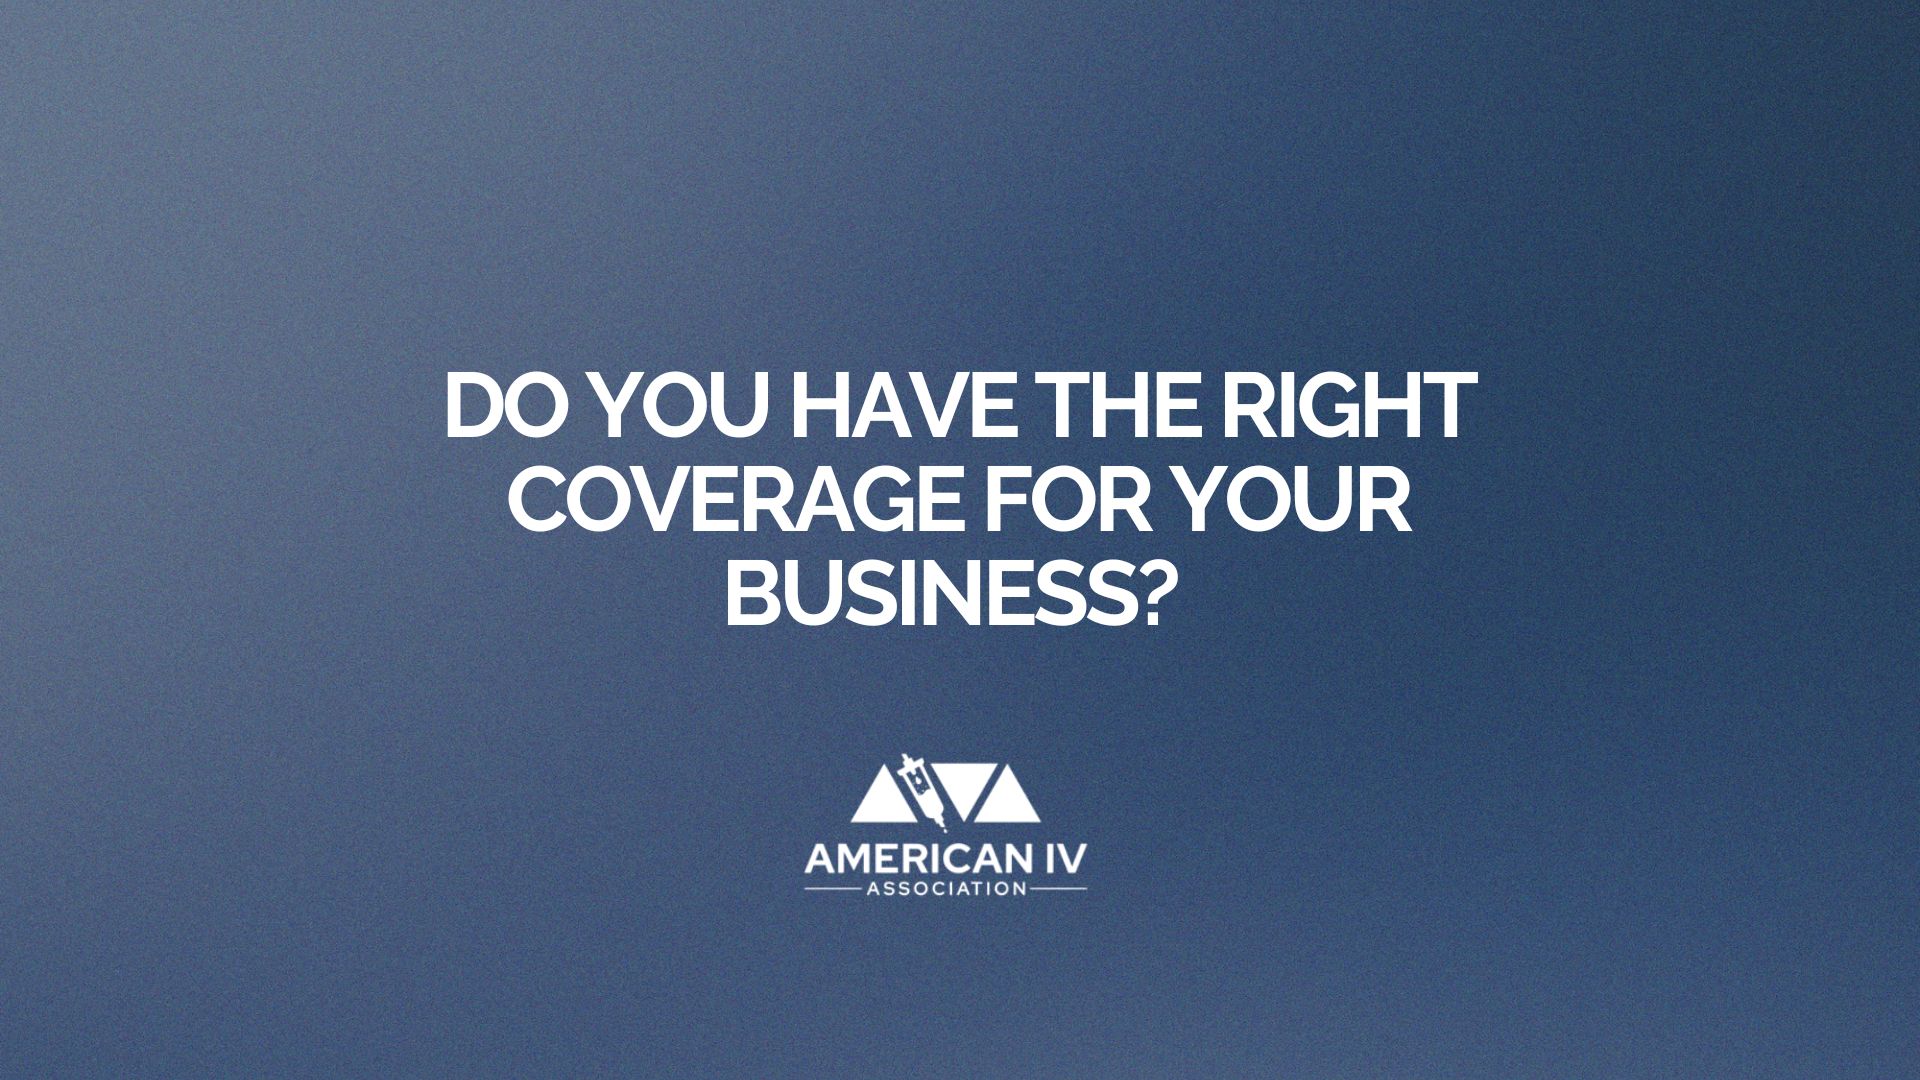 Do you have the right coverage for your business?